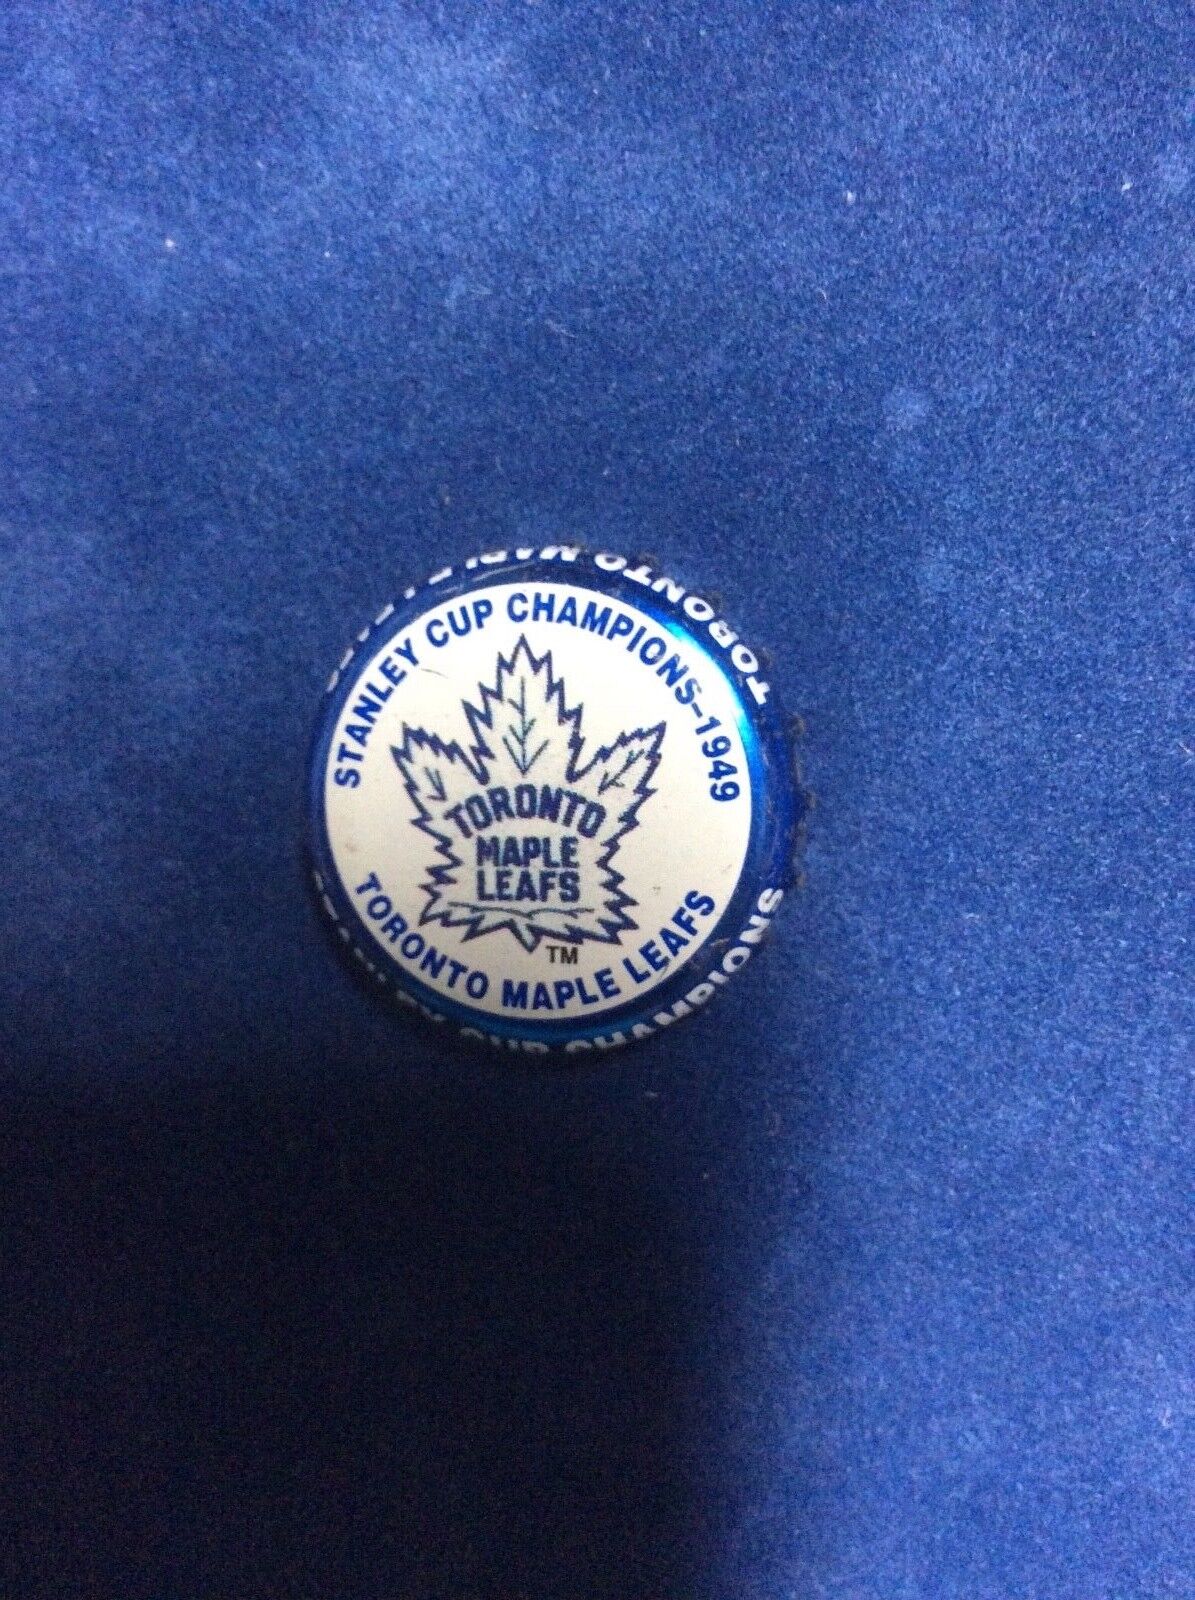 Stanley Cup Toronto Maple Leafs 1949 Limited Edition NHL Labatts Beer Cap 2001